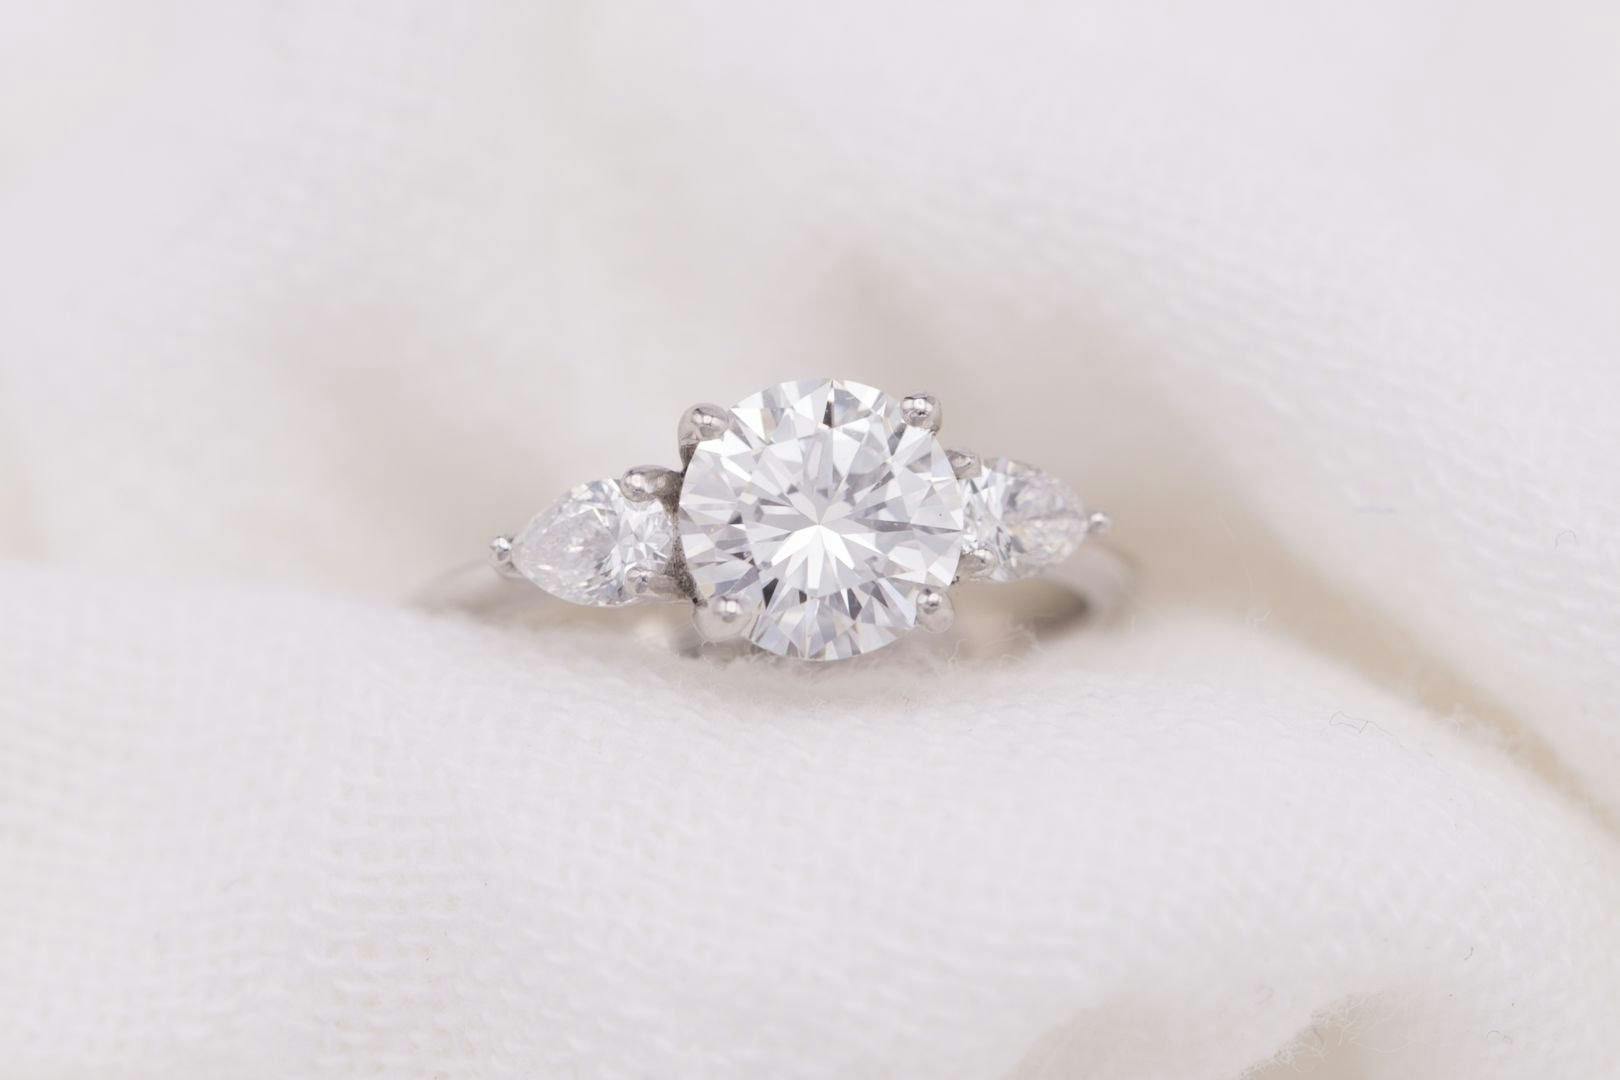 6 Steps to Buying a One-Carat Diamond Ring